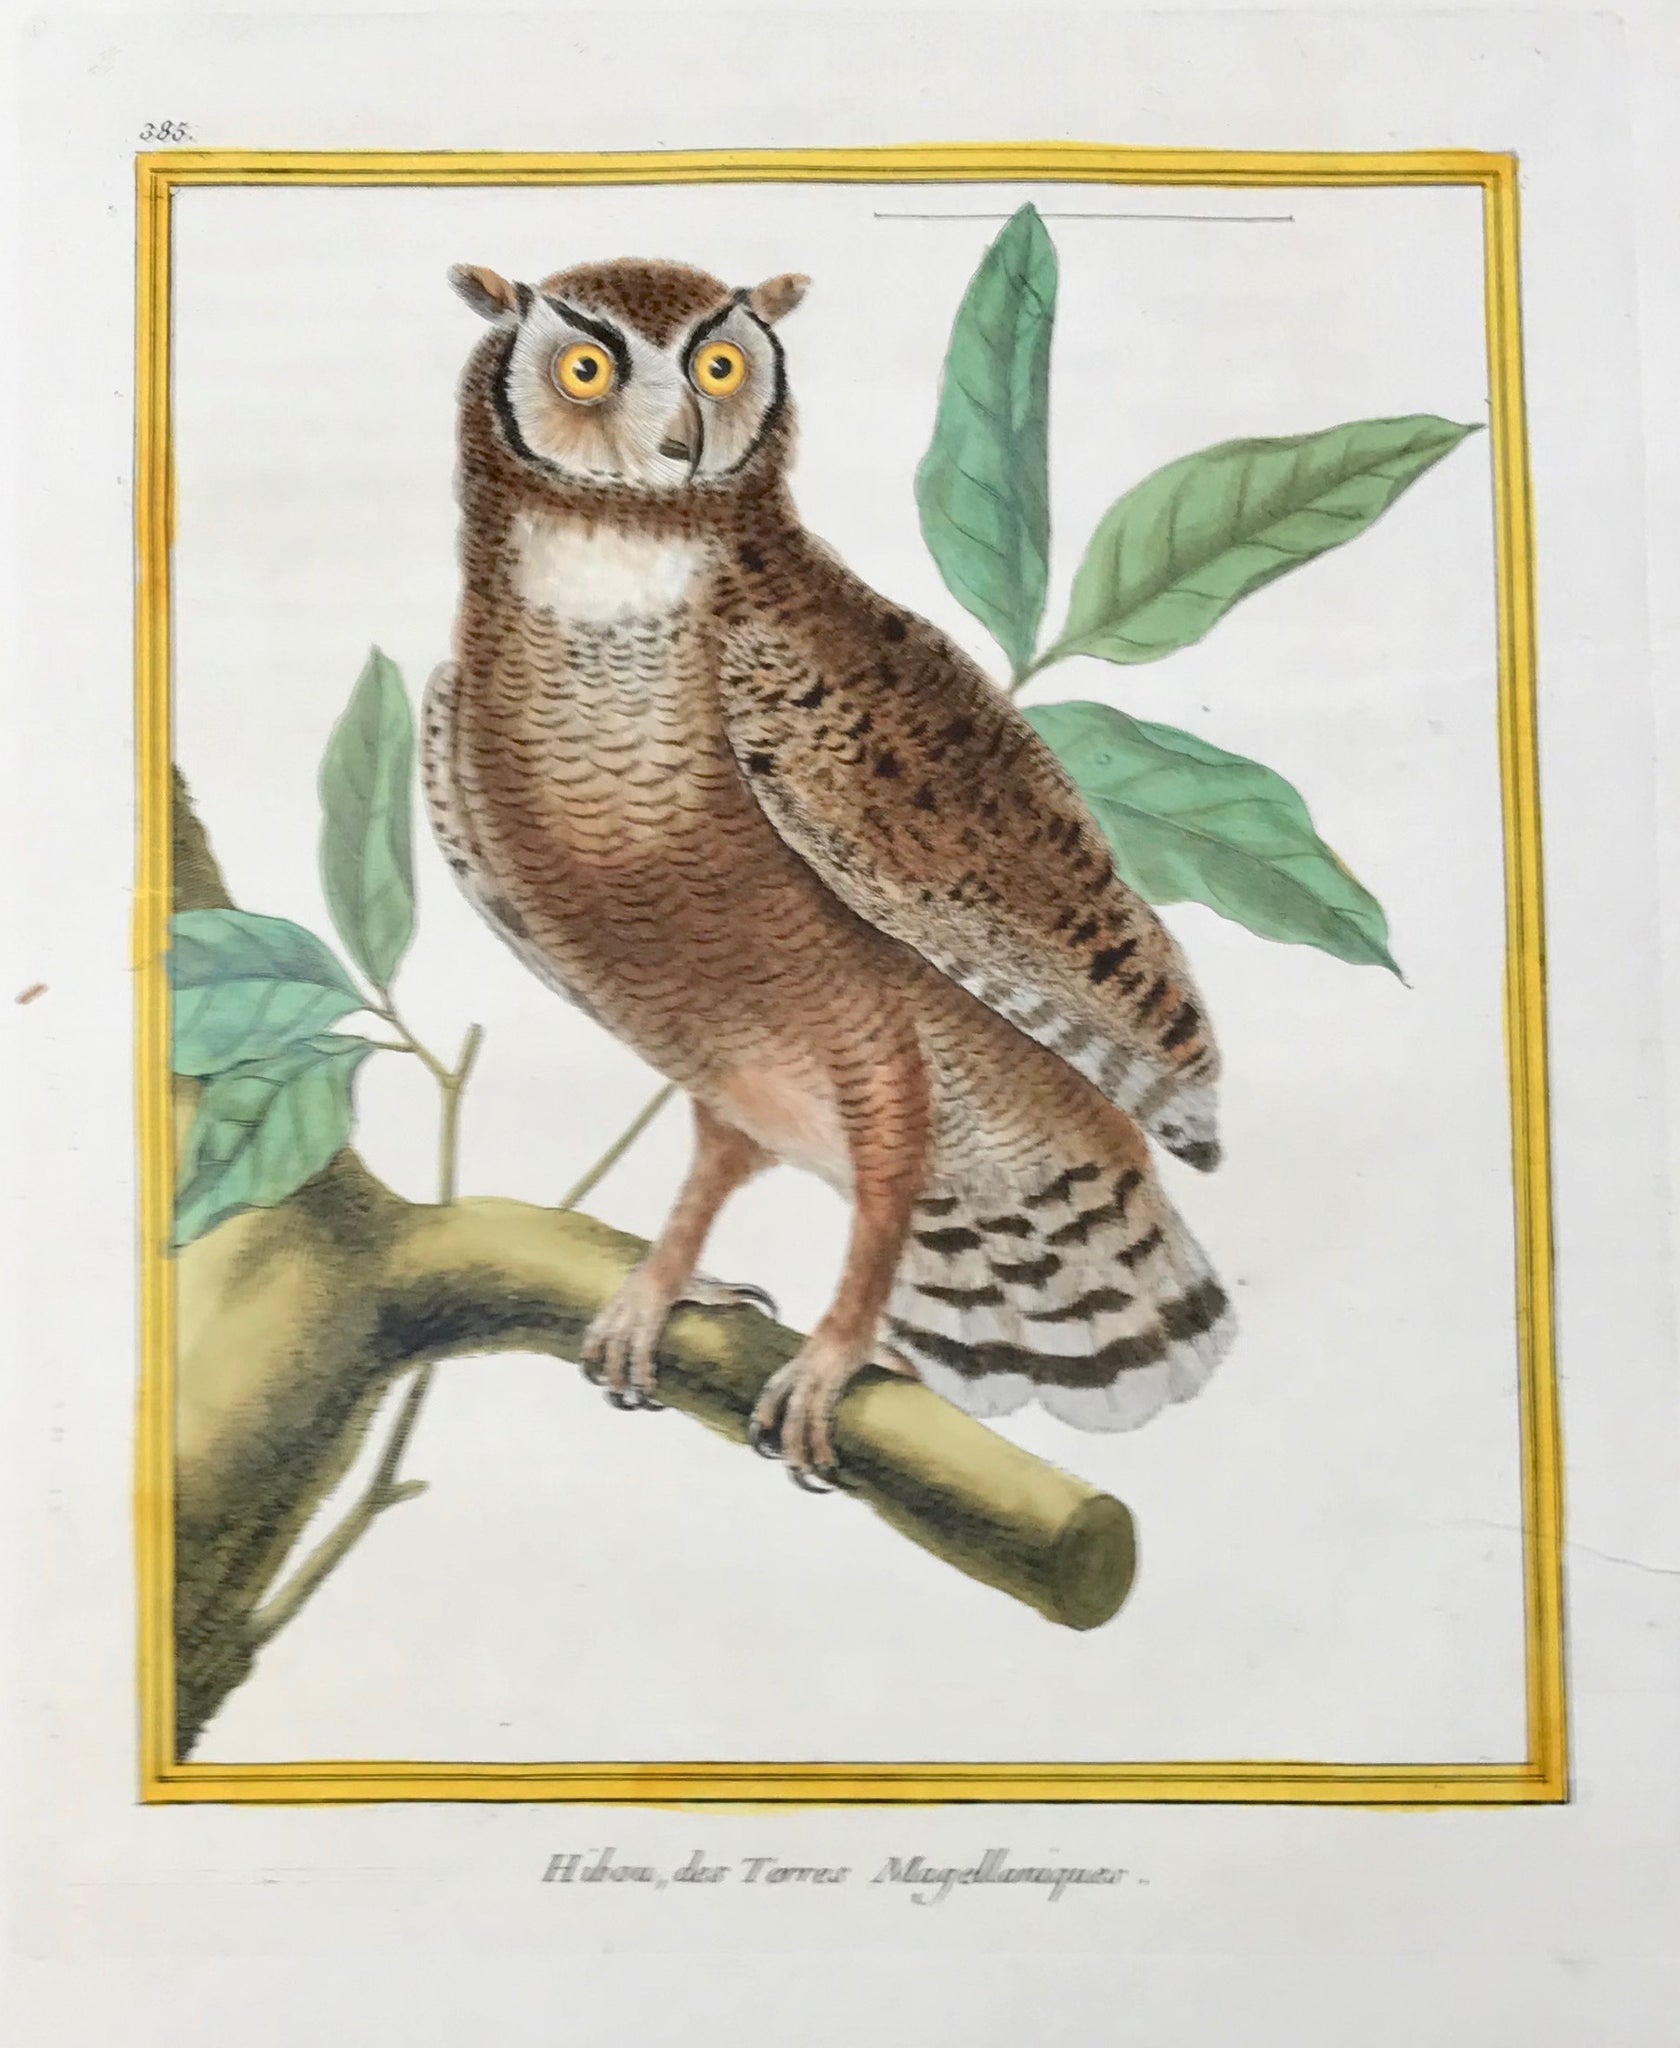 Hibou, des Terres  Magellaniques.  Antique Owl Prints  by François Nicolas Martinet  Born 1731 in Paris. His death date is unknown (to us). In his monumental "Histoire de les Oiseaux", Paris, 1778, Martinet published literally the entire world of birds on 483 most decorative copper plates. Their original authentic hand-coloring is simply superb. And the one hundred and some plates we were able to buy are of the finest condition